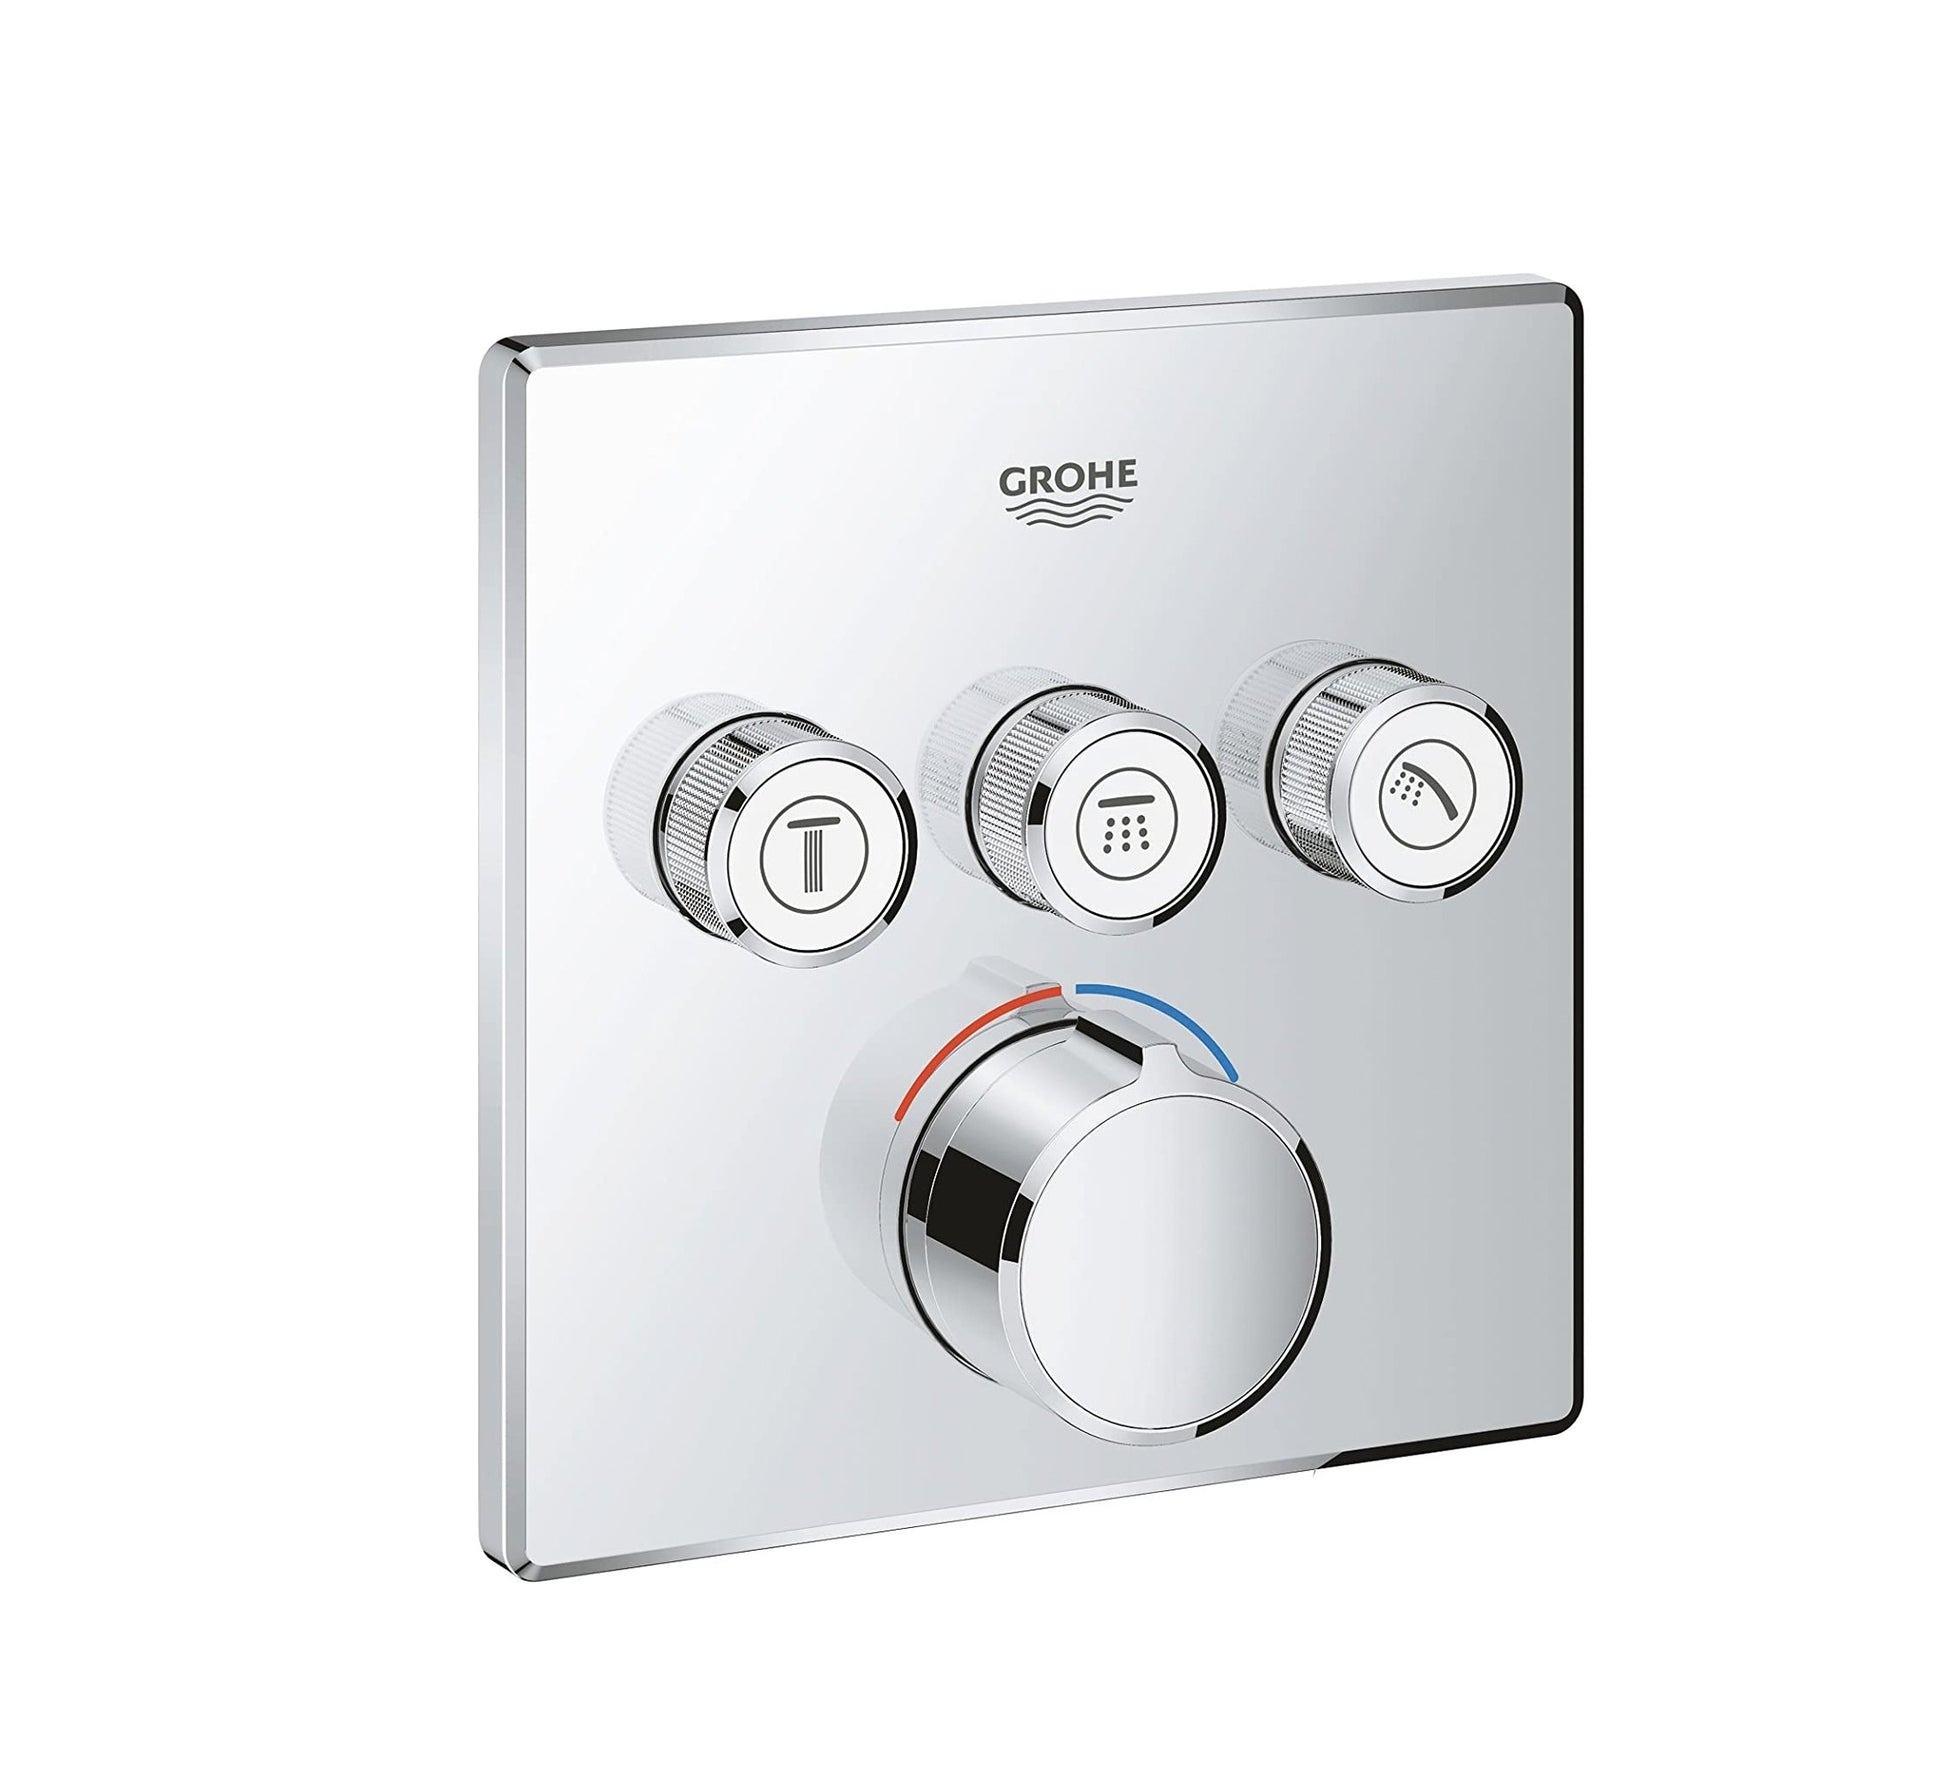 GROHE SMART CONTROL CONCEALED MIXER SQUARE WITH ONE VALVE 3SC - 29149000 - Tadmur Trading